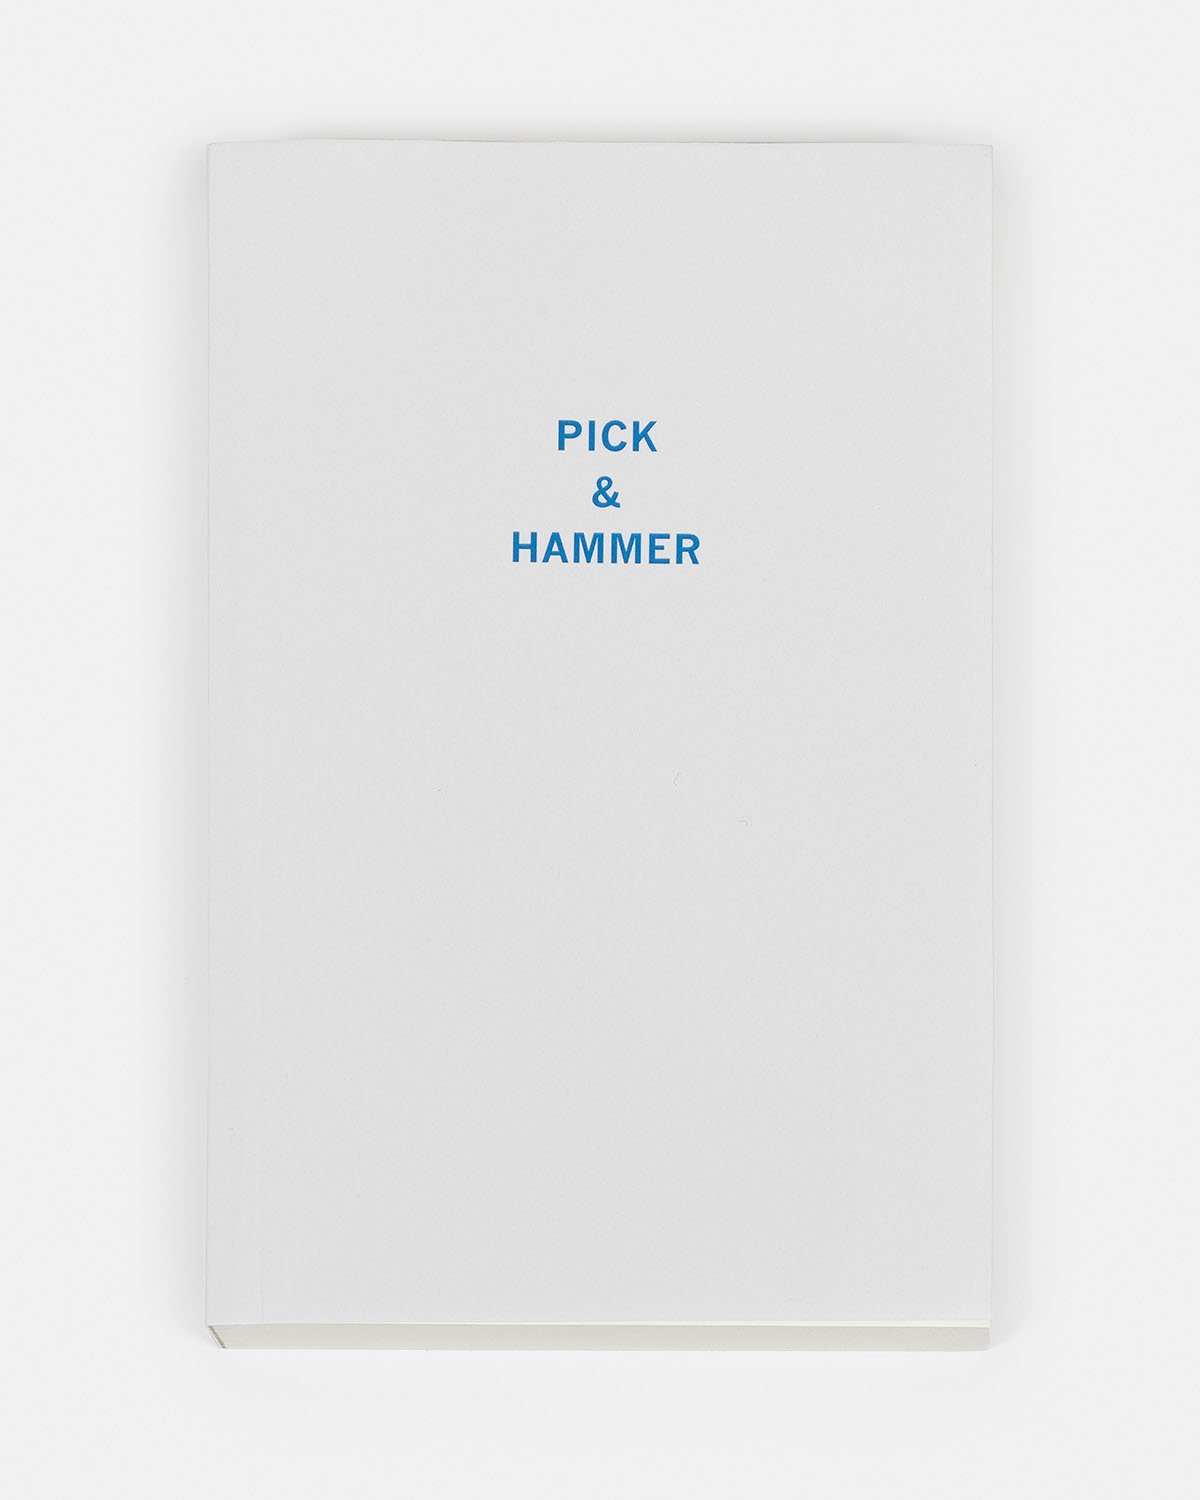 Pick & Hammer, 2015 - Additional view